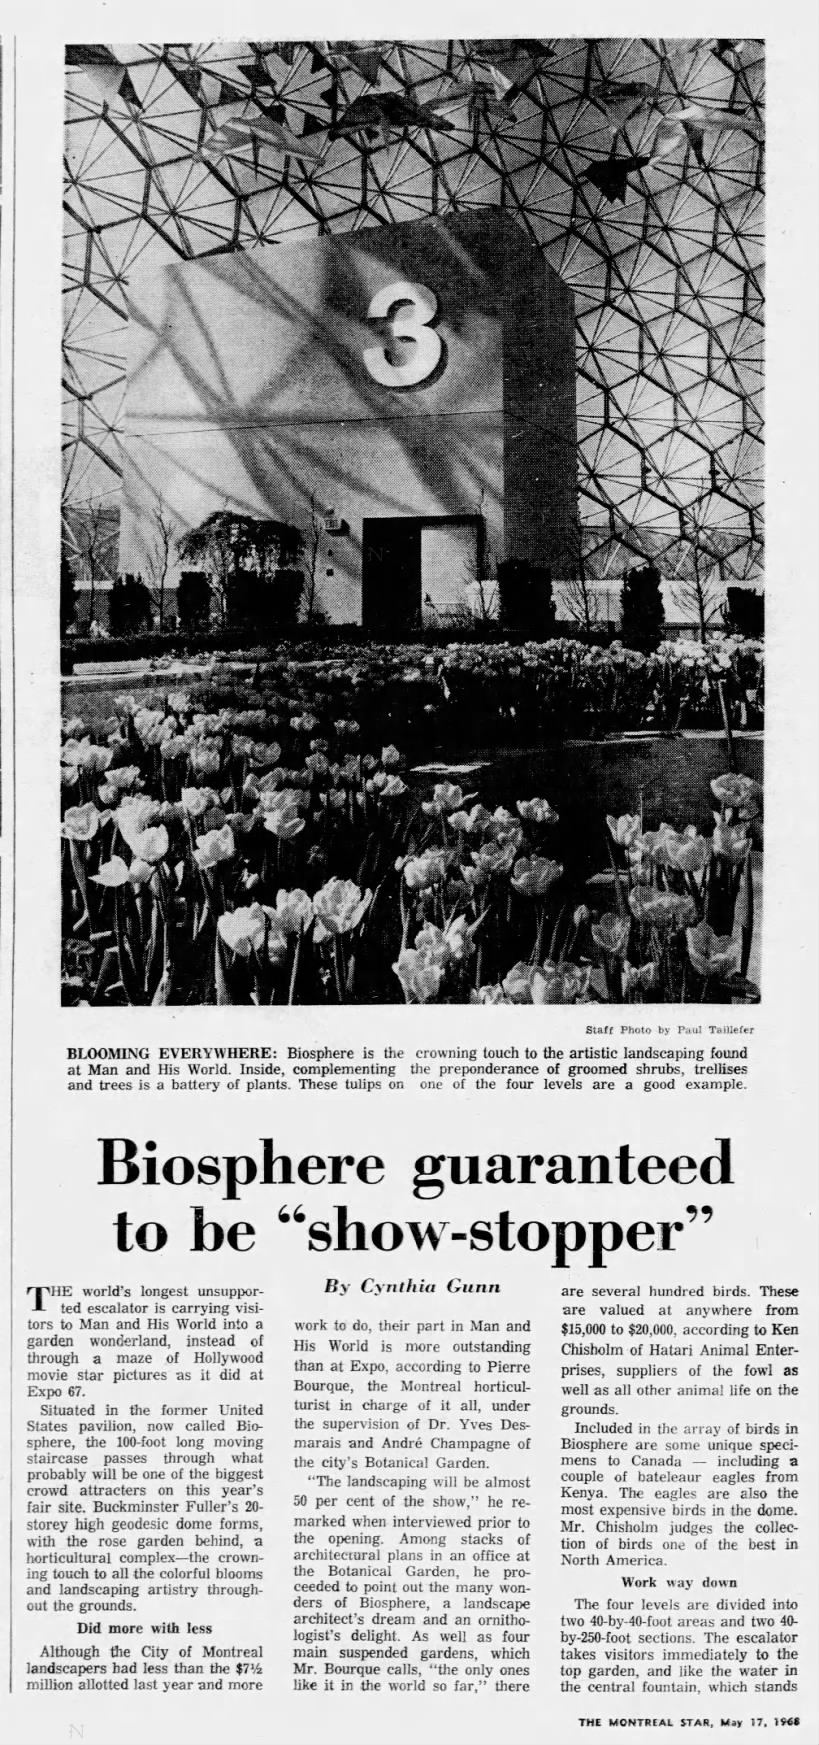 Biosphere guaranteed to be "show-stopper"